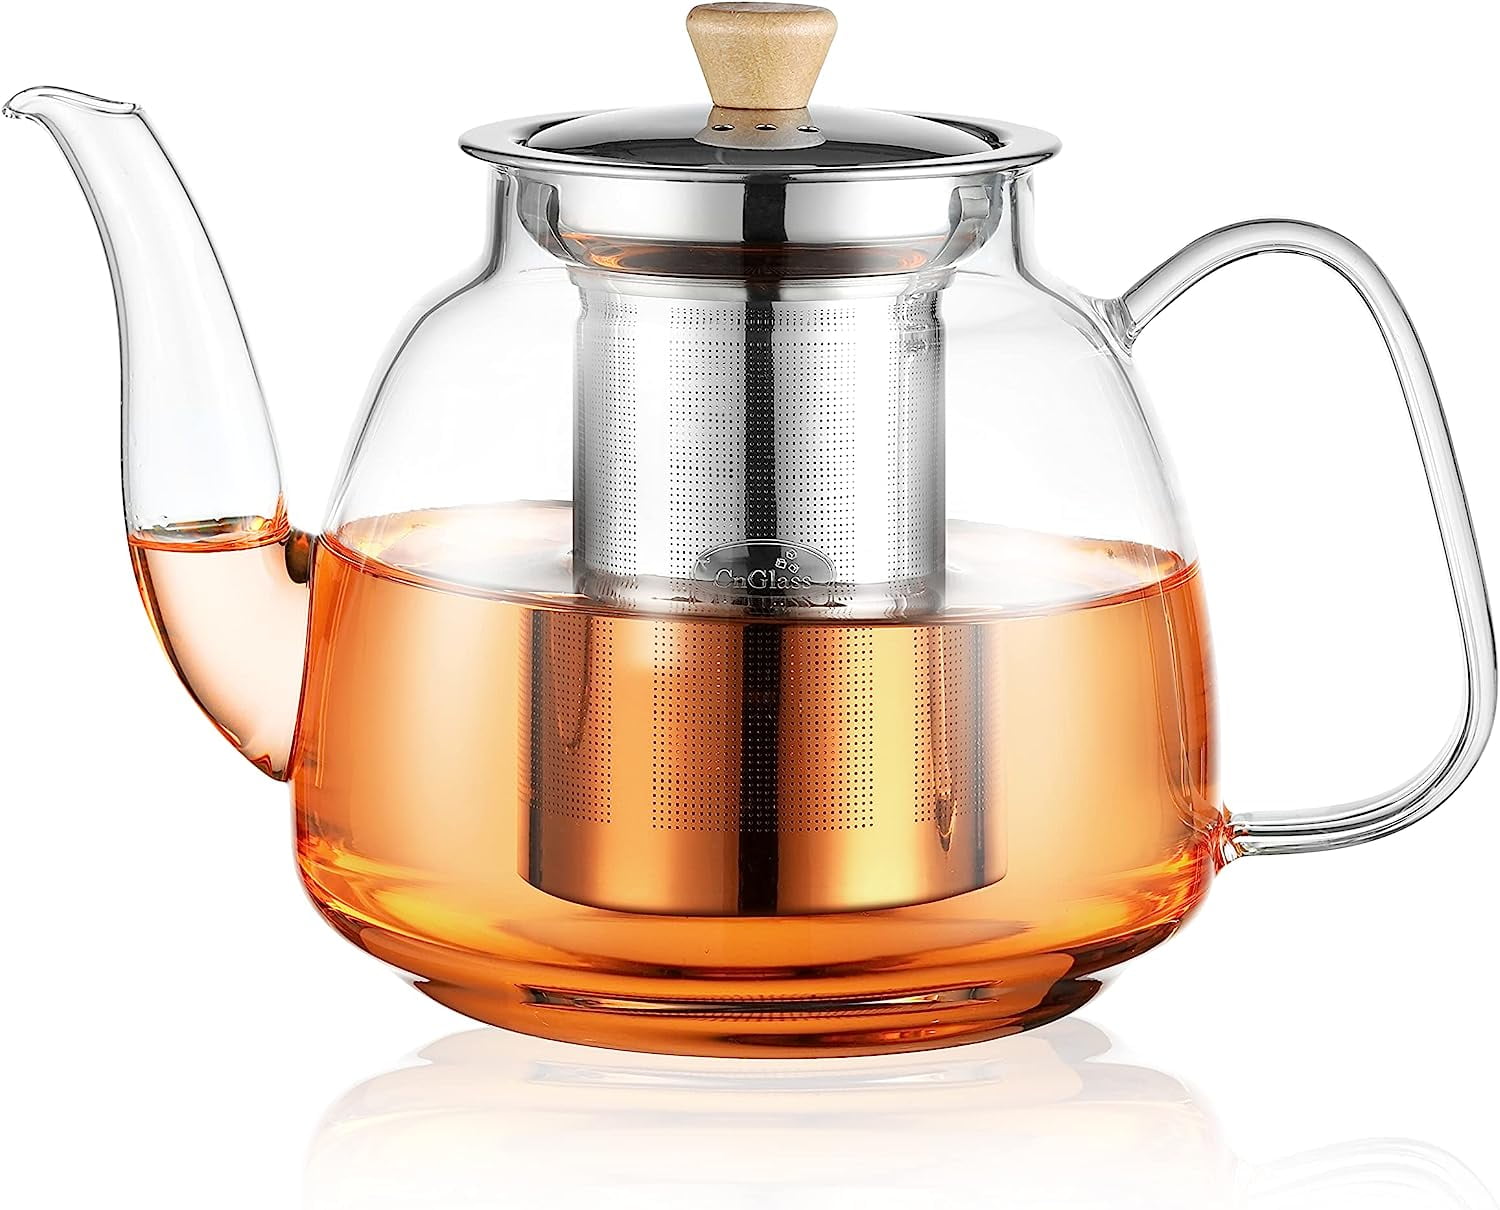 Vianté Electric Glass Tea Kettle with Removable Infuser. Hot tea infuser  Pot for Loose Leaf & Bagged Tea. BPA-FREE. Stainless Steel & Borosilicate